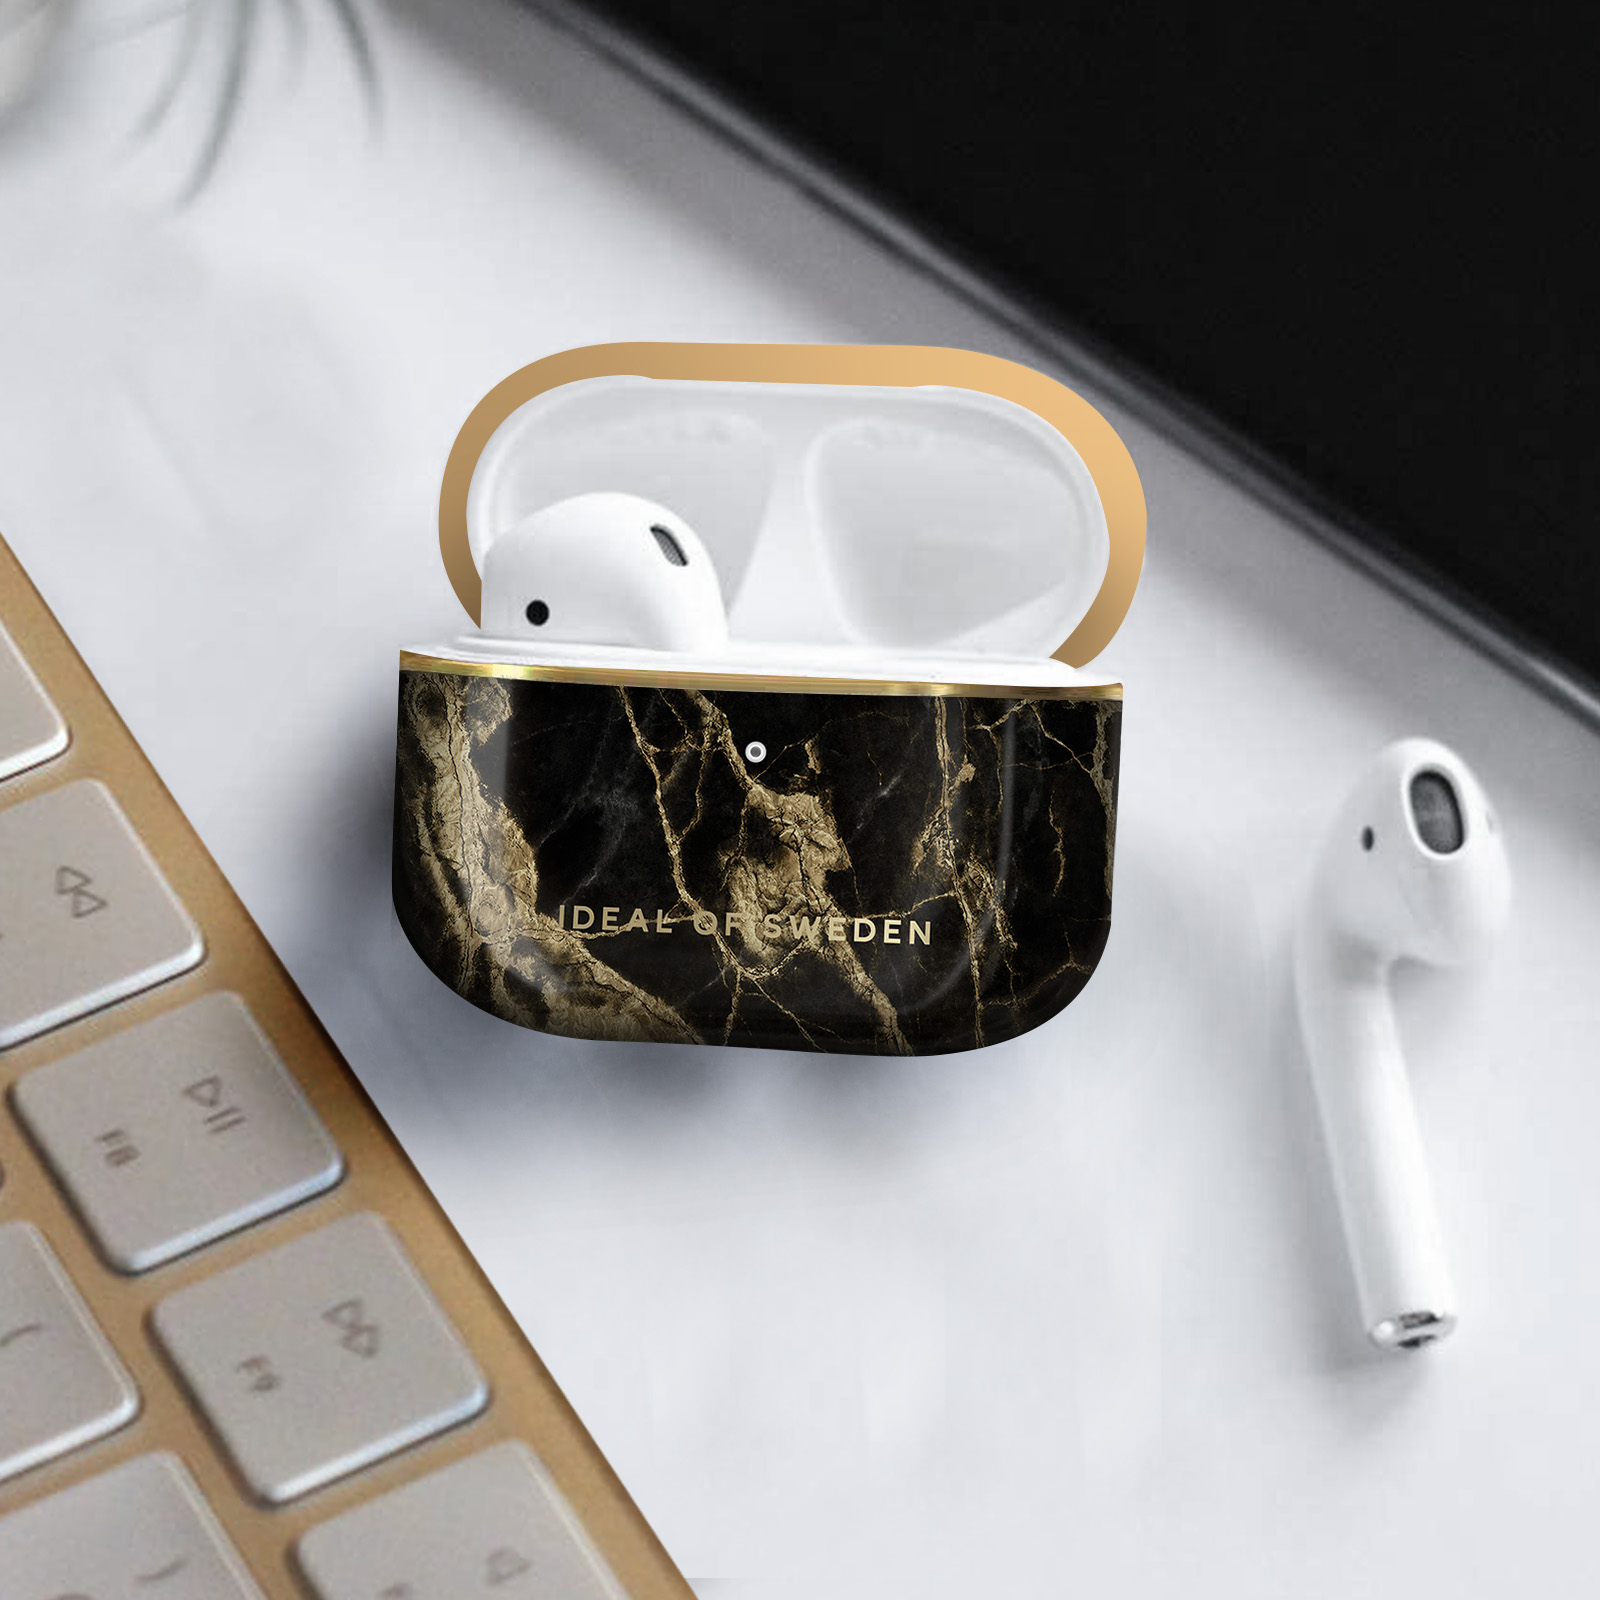 IDEAL OF Cover AirPod Golden für: passend Smoke Marble Full Apple SWEDEN Case IDFAPC-PRO-191